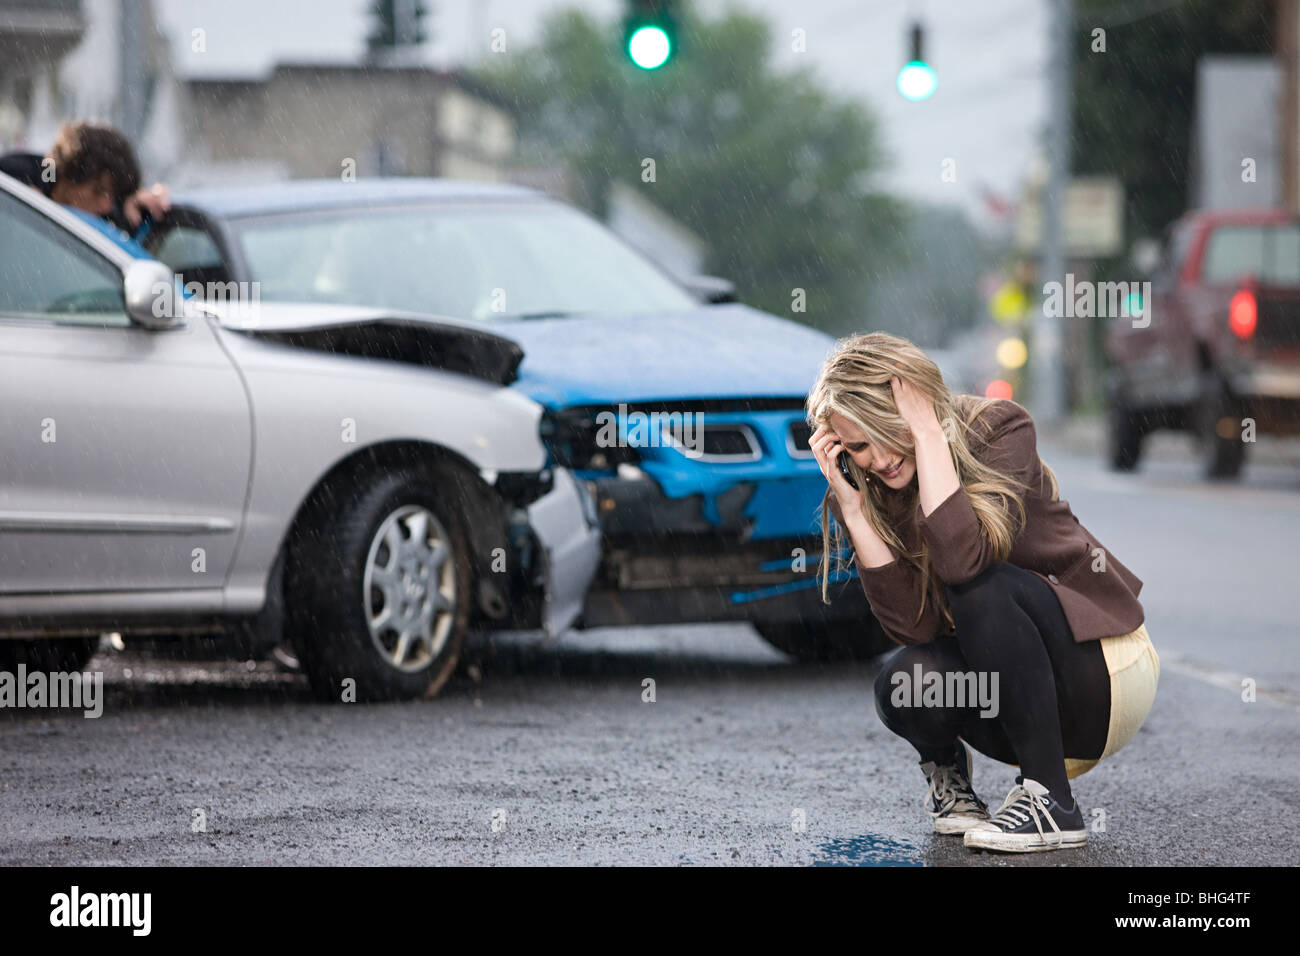 Young woman involved in road accident Stock Photo